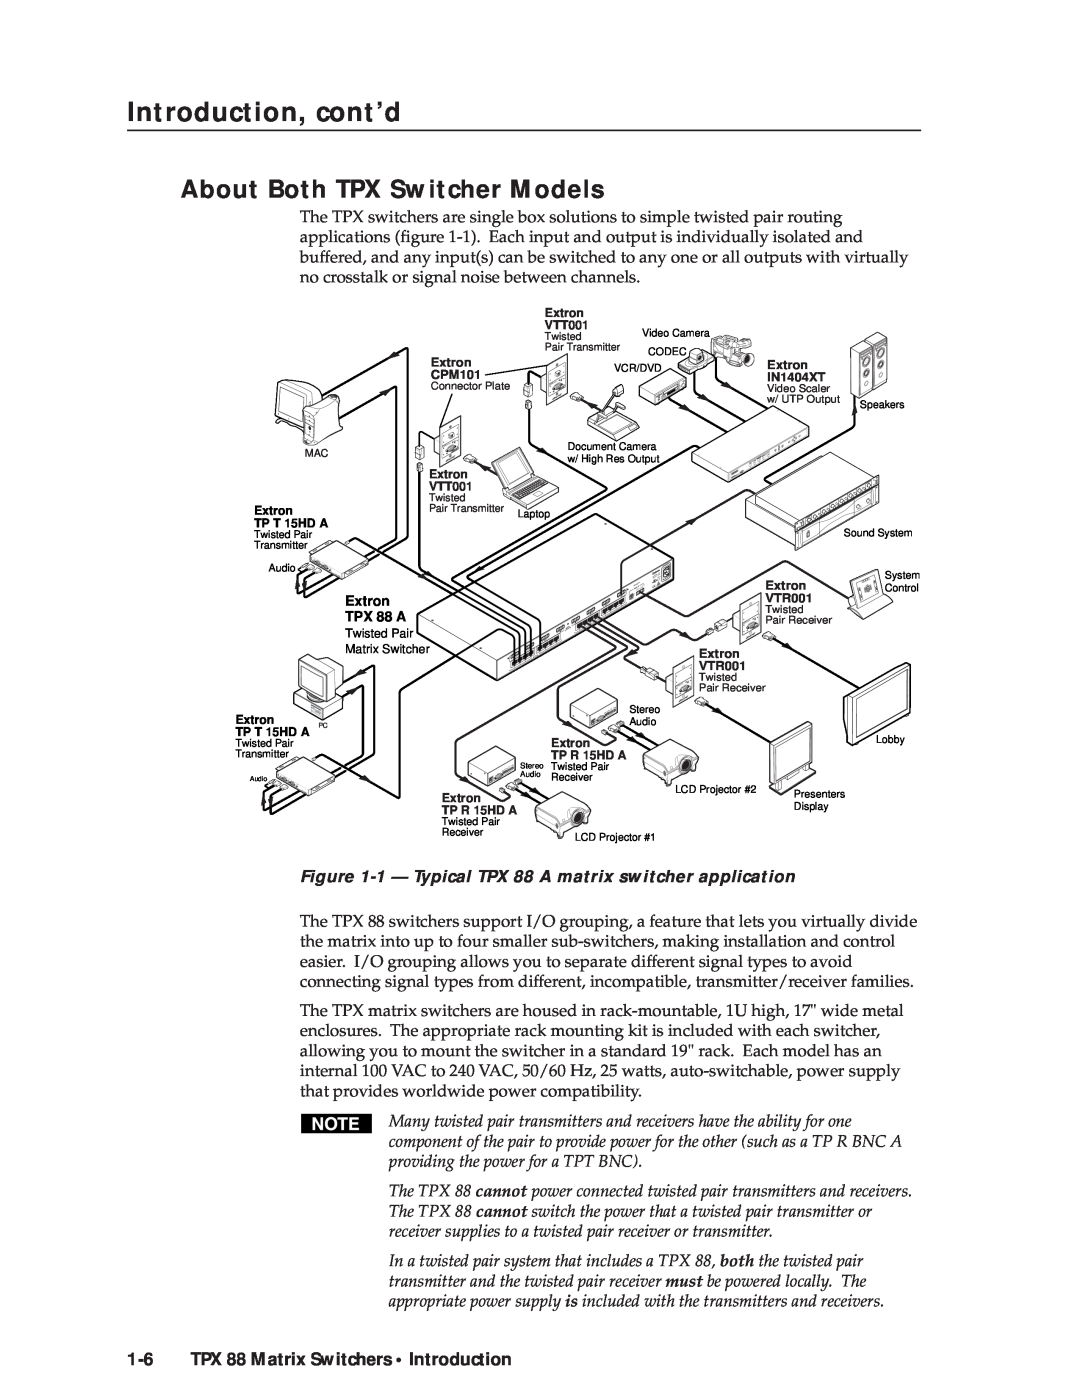 Extron electronic manual About Both TPX Switcher Models, 1 - Typical TPX 88 A matrix switcher application 